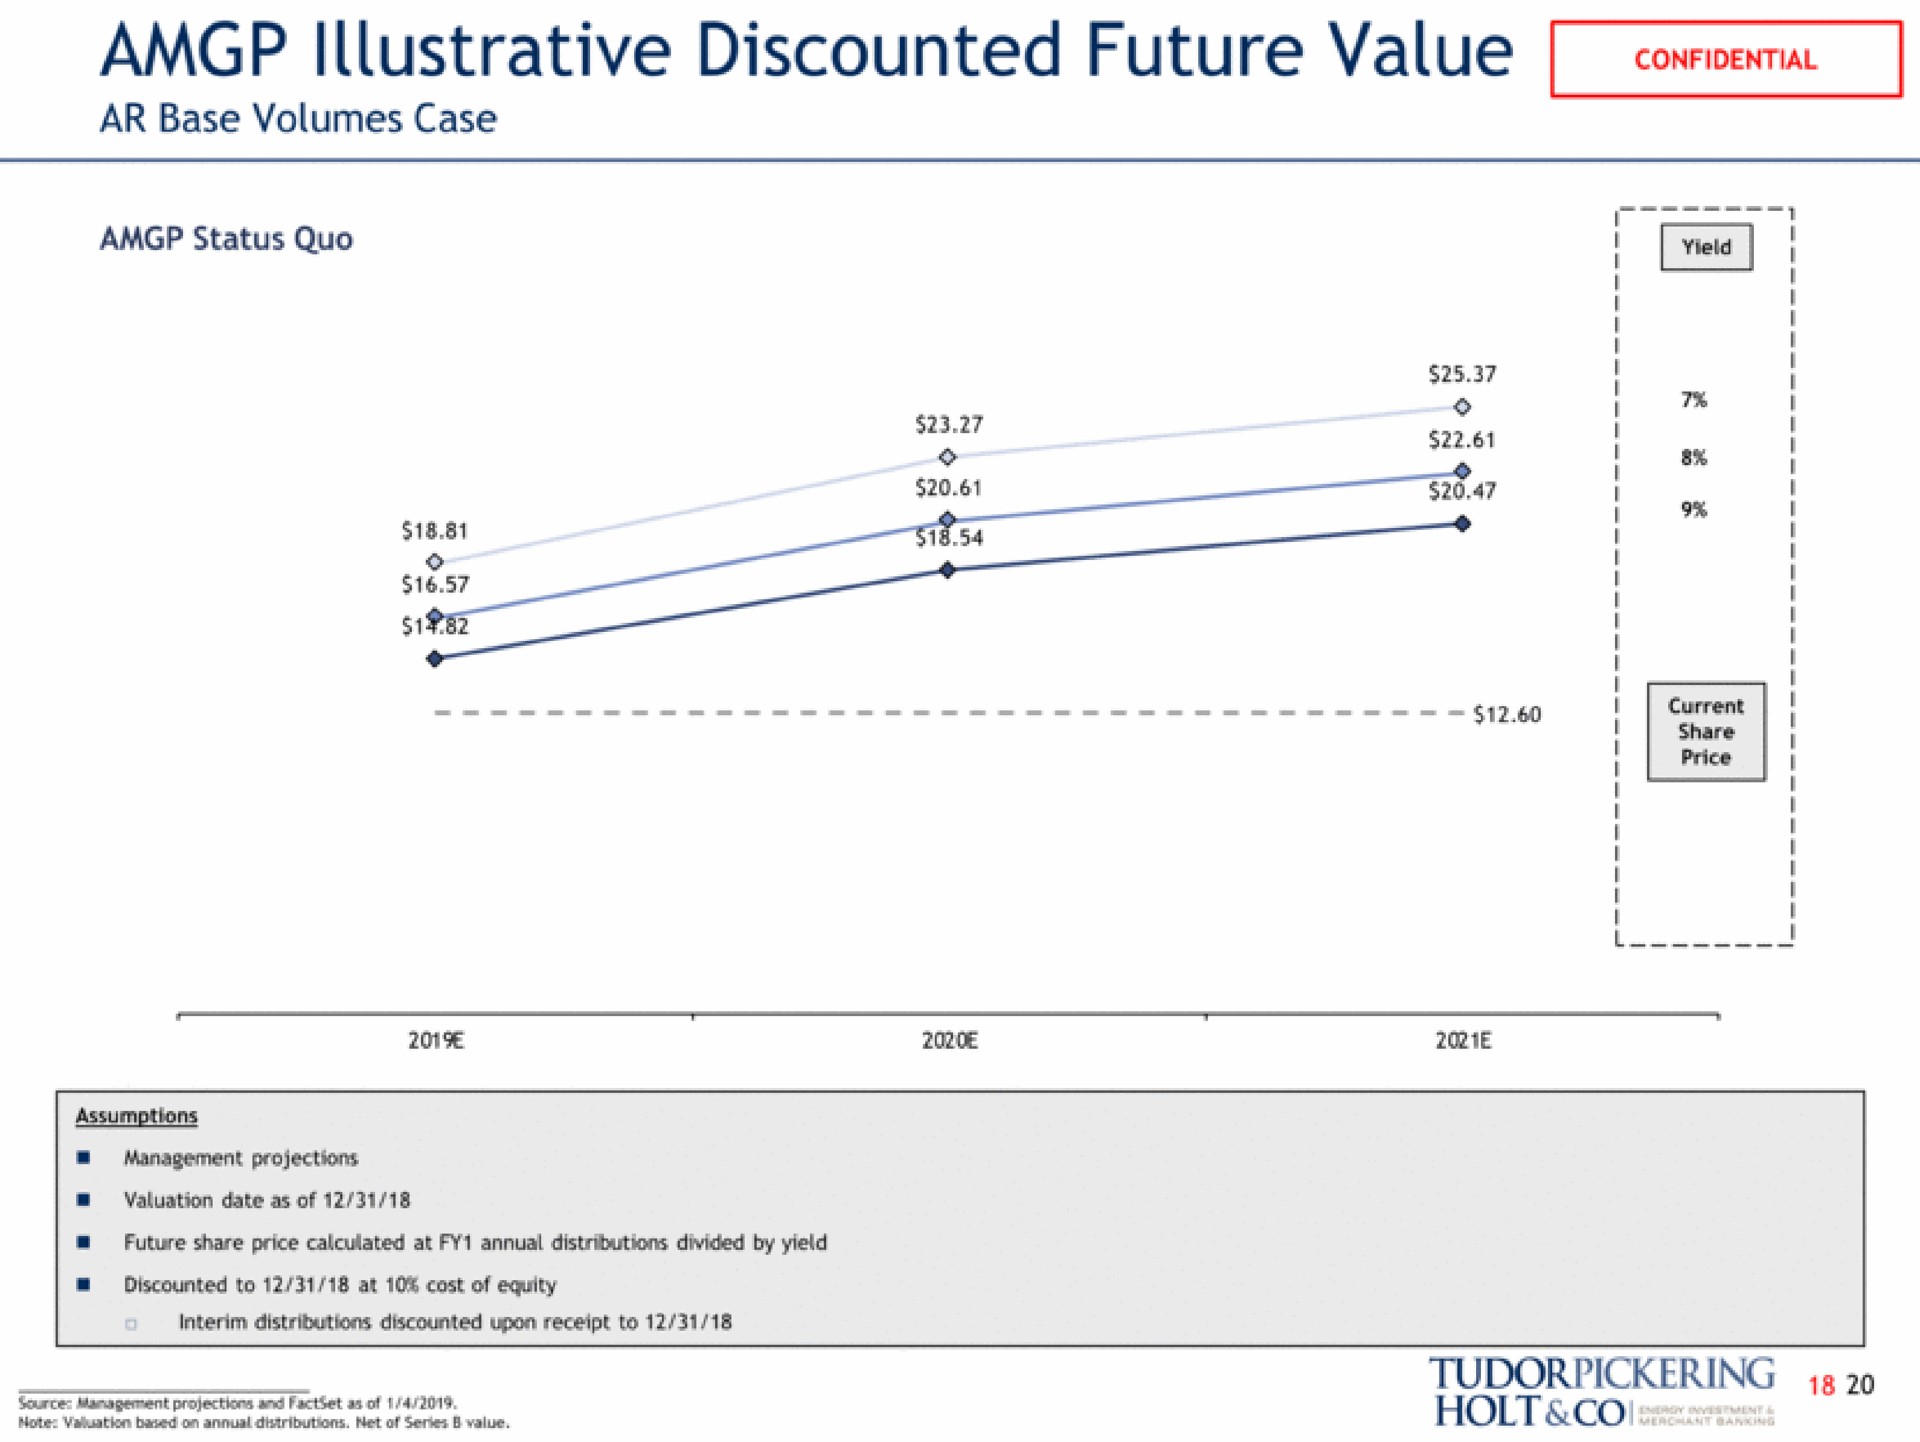 illustrative discounted future value note based on annual net of series value holt | Tudor, Pickering, Holt & Co